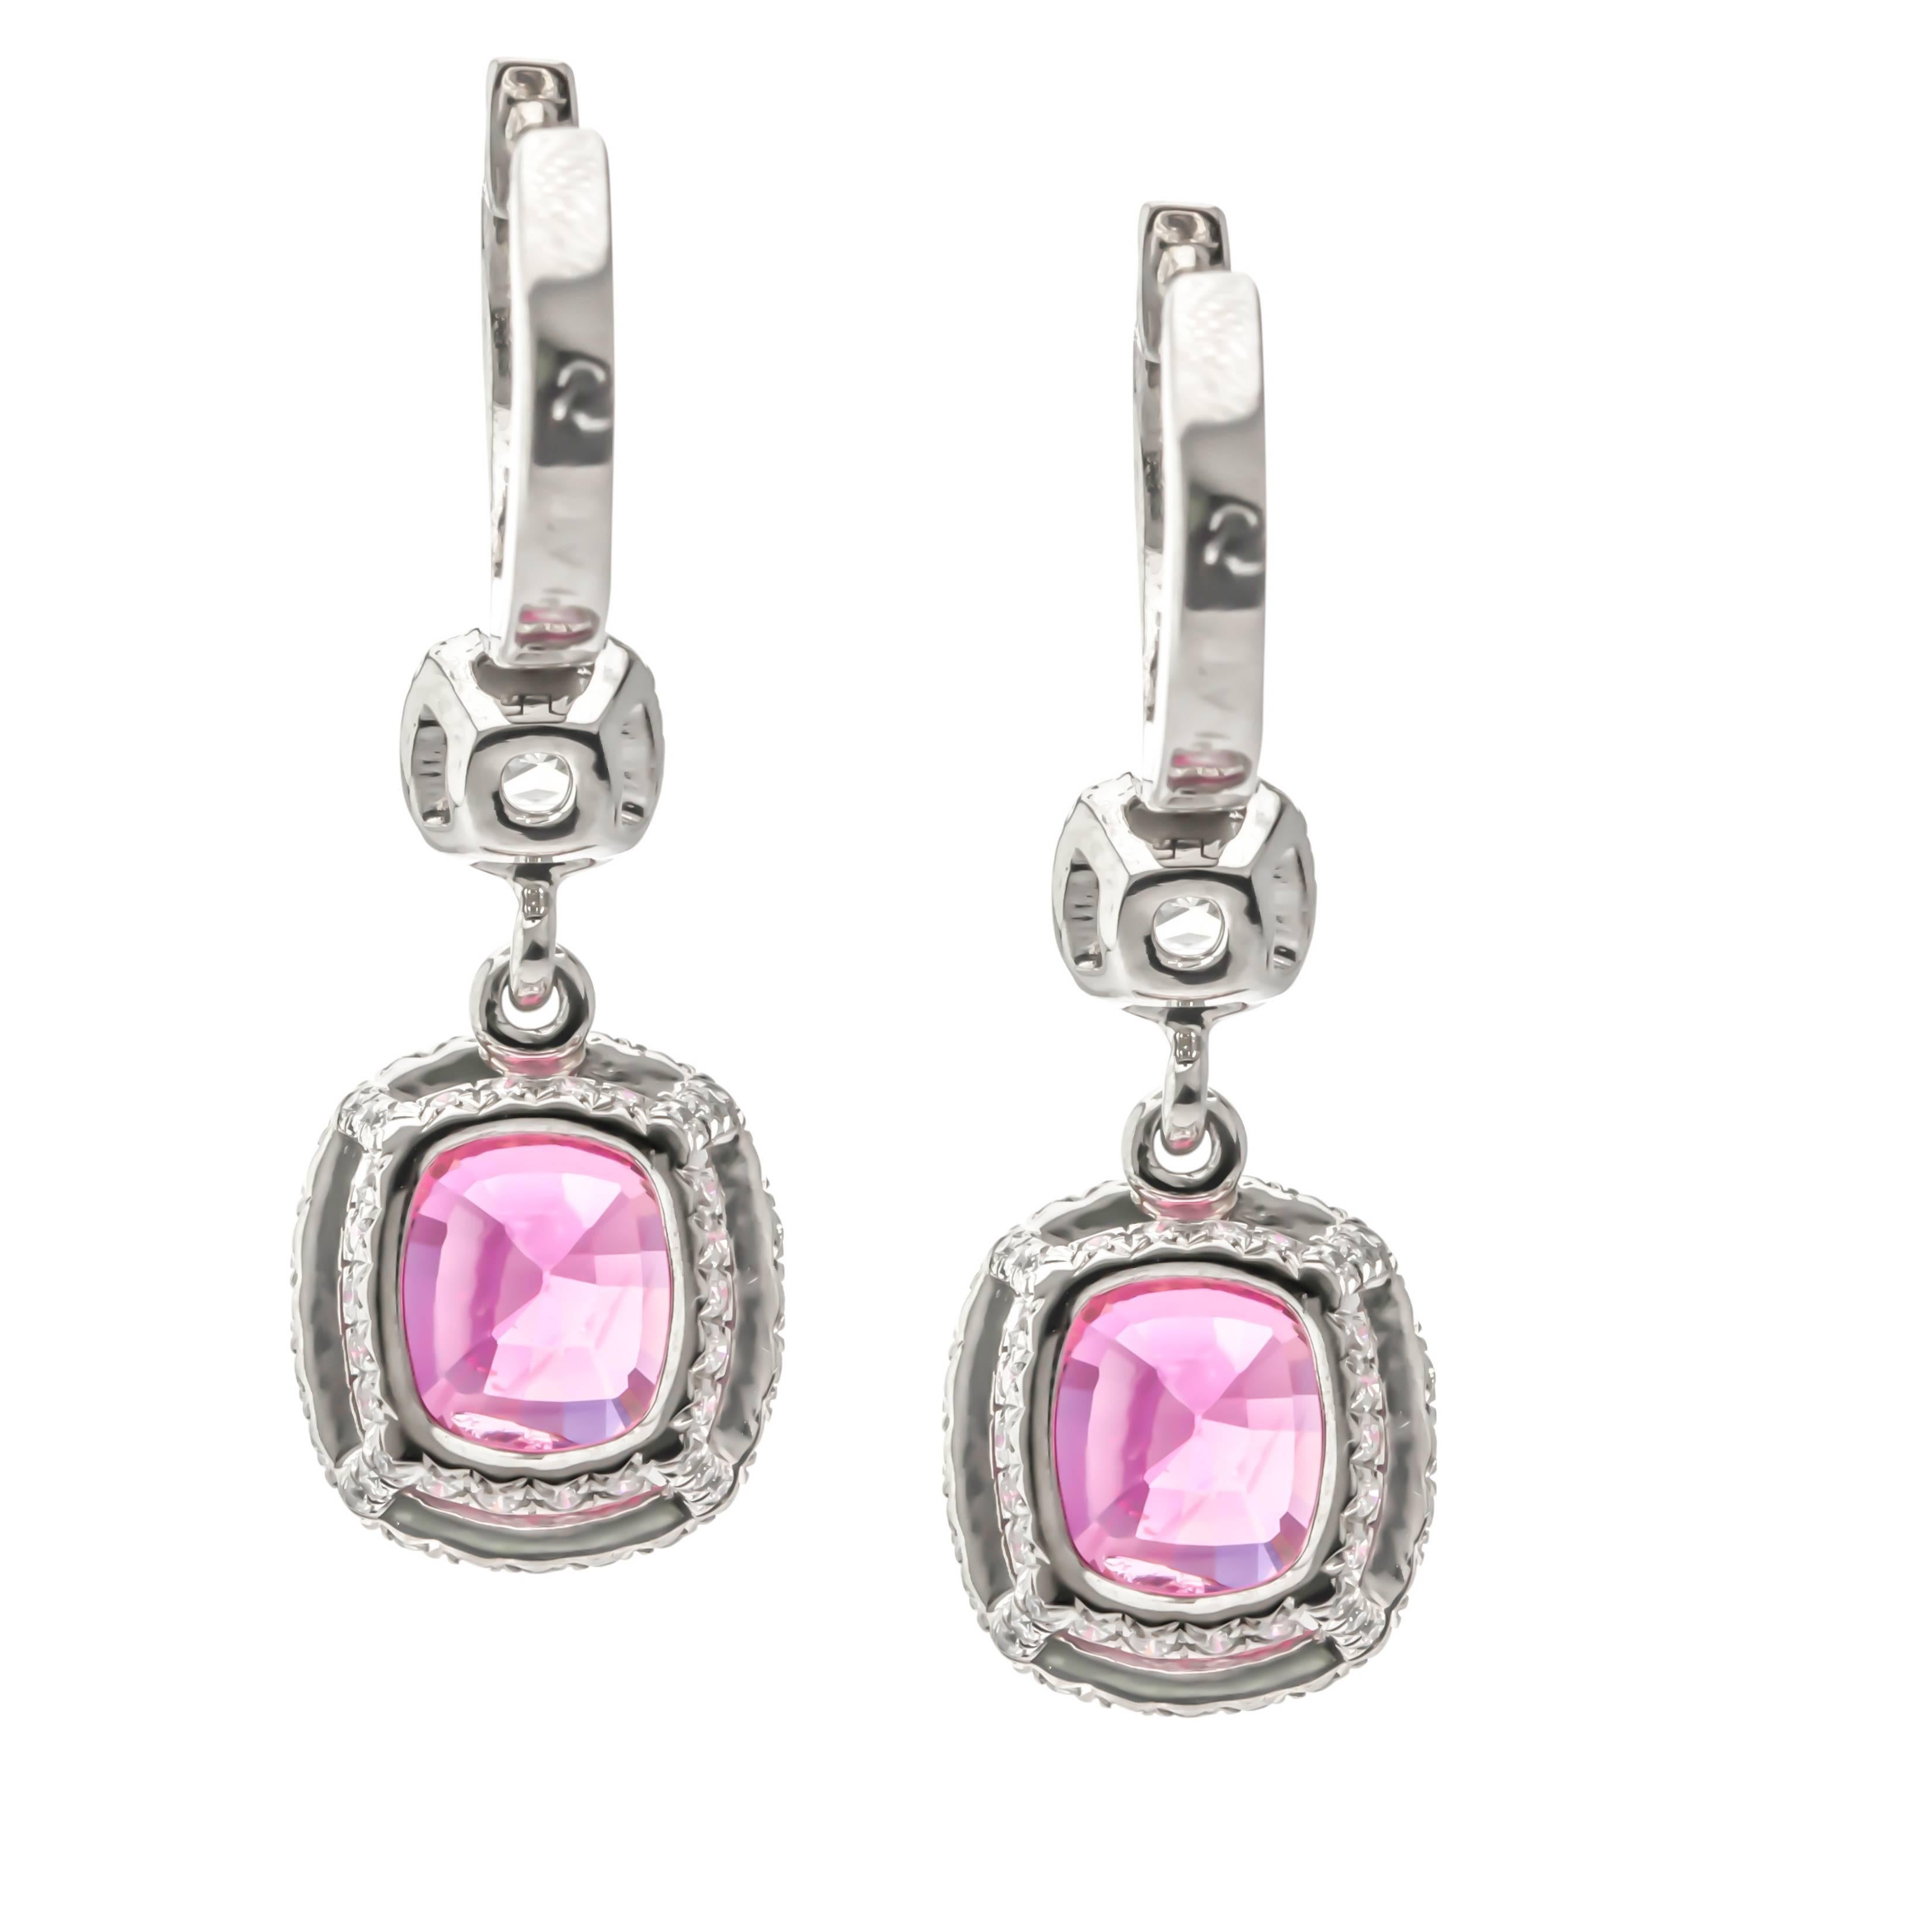 One of a Kind 5.03 Carat Pink Sapphire Diamond Earrings For Sale 5